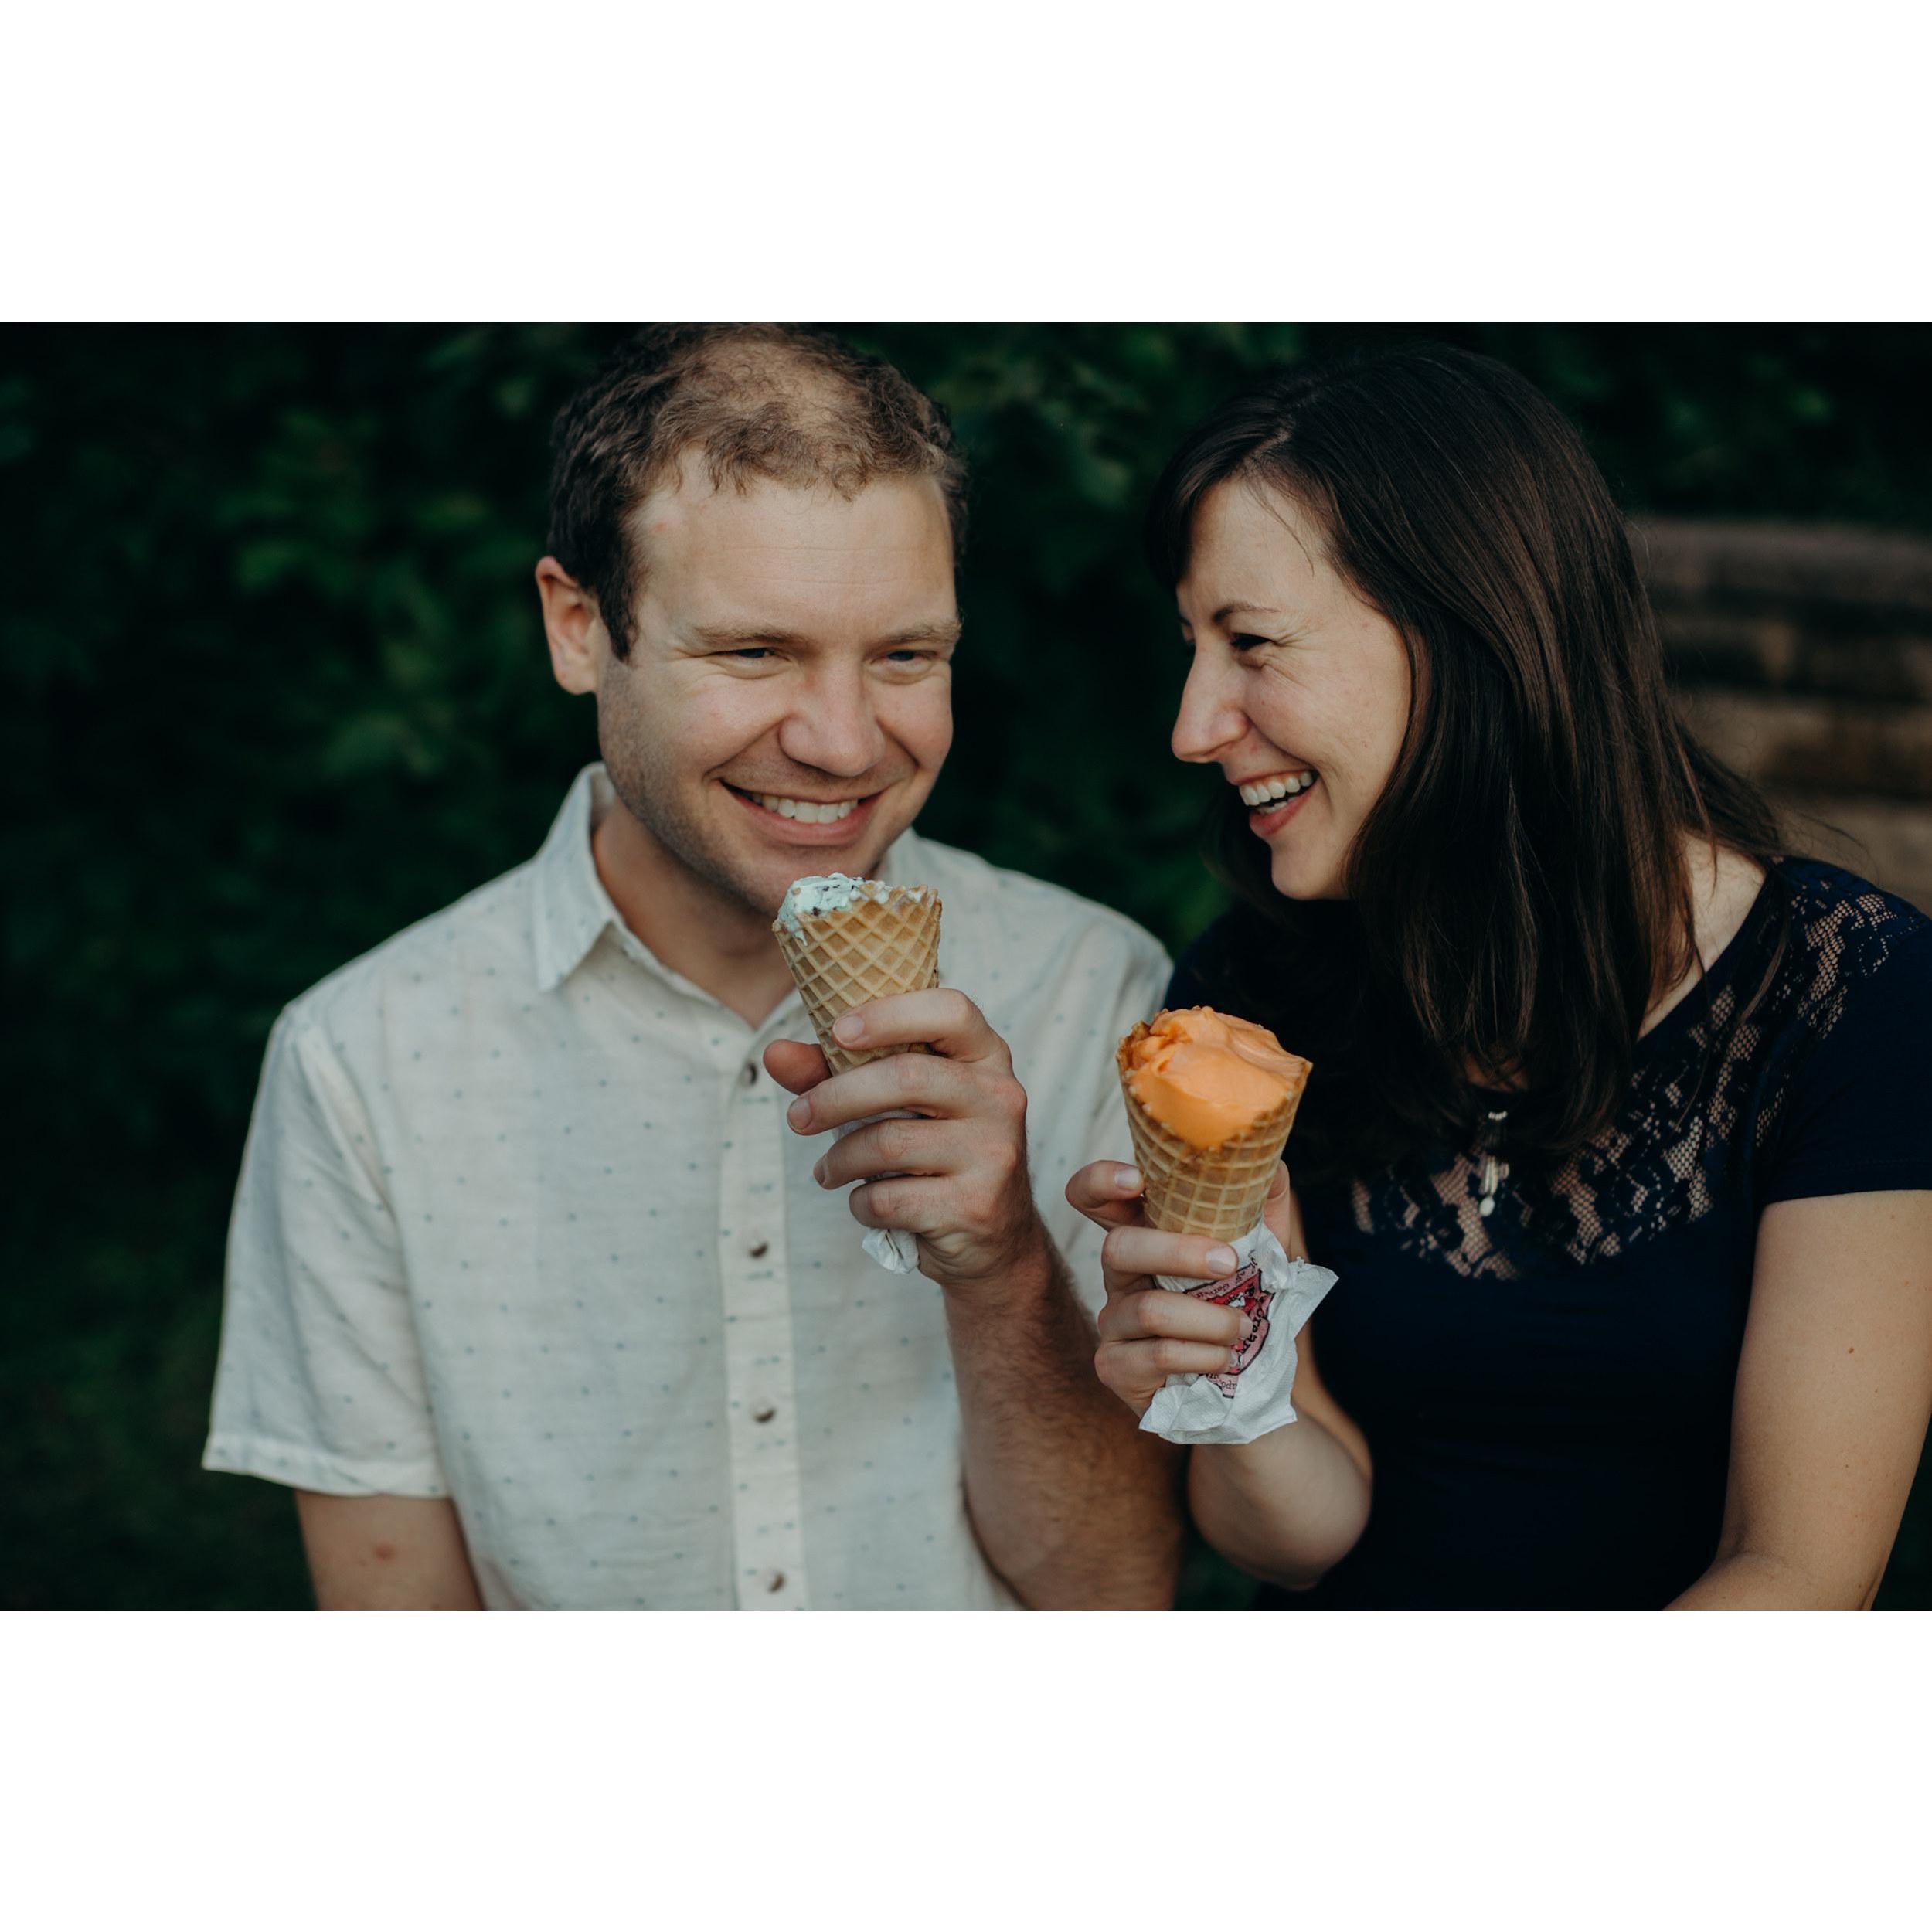 Our first date was walking in the drizzly rain to a local ice cream shop. Since then it’s been a frequent date night location, as well as a great spot to shoot our Engagement Photos.